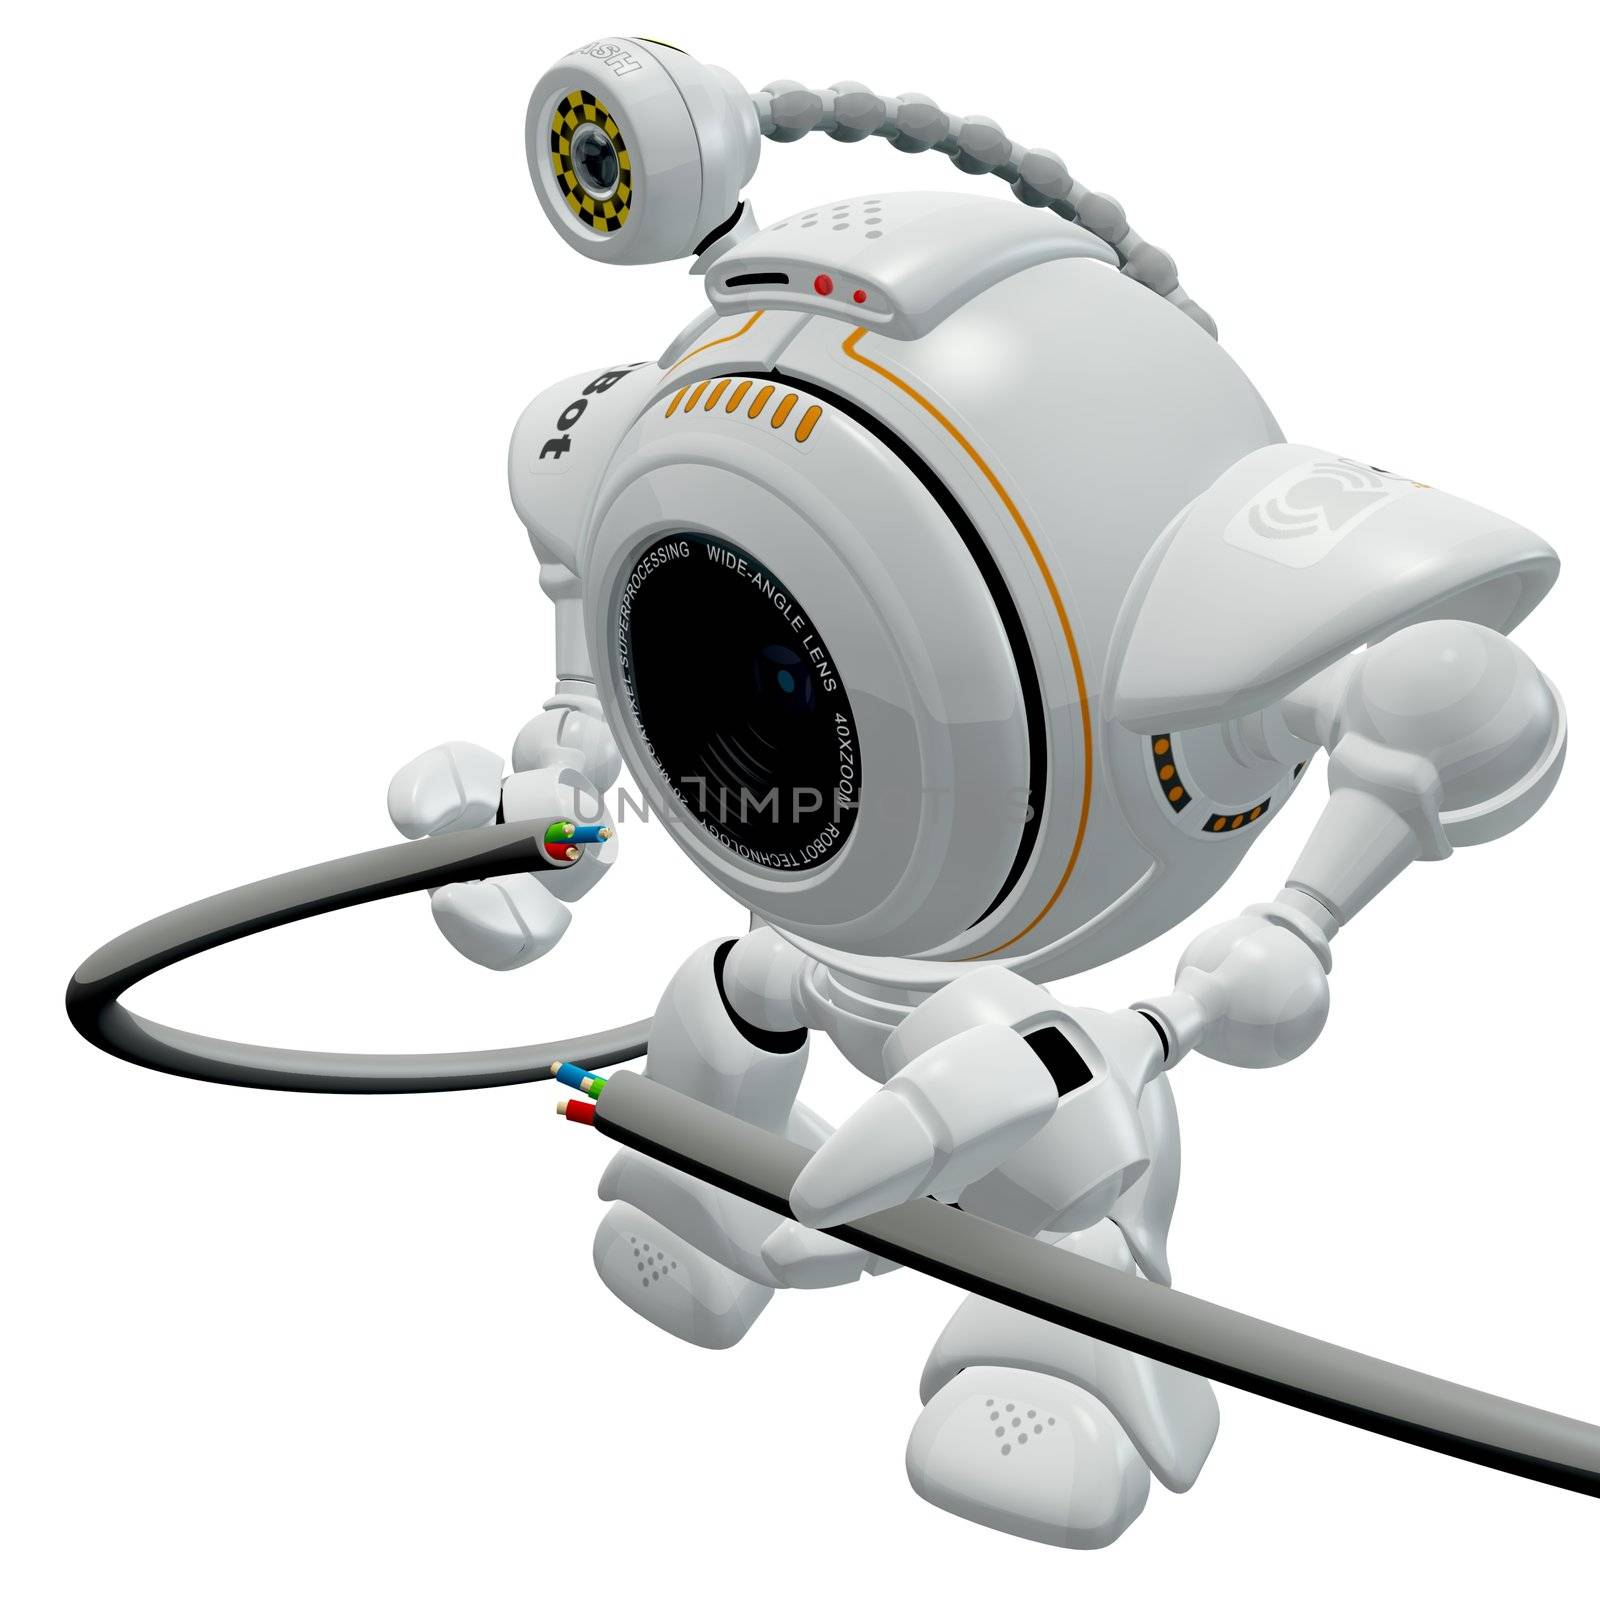 Robot Web Cam Fixing Cord by LeoBlanchette